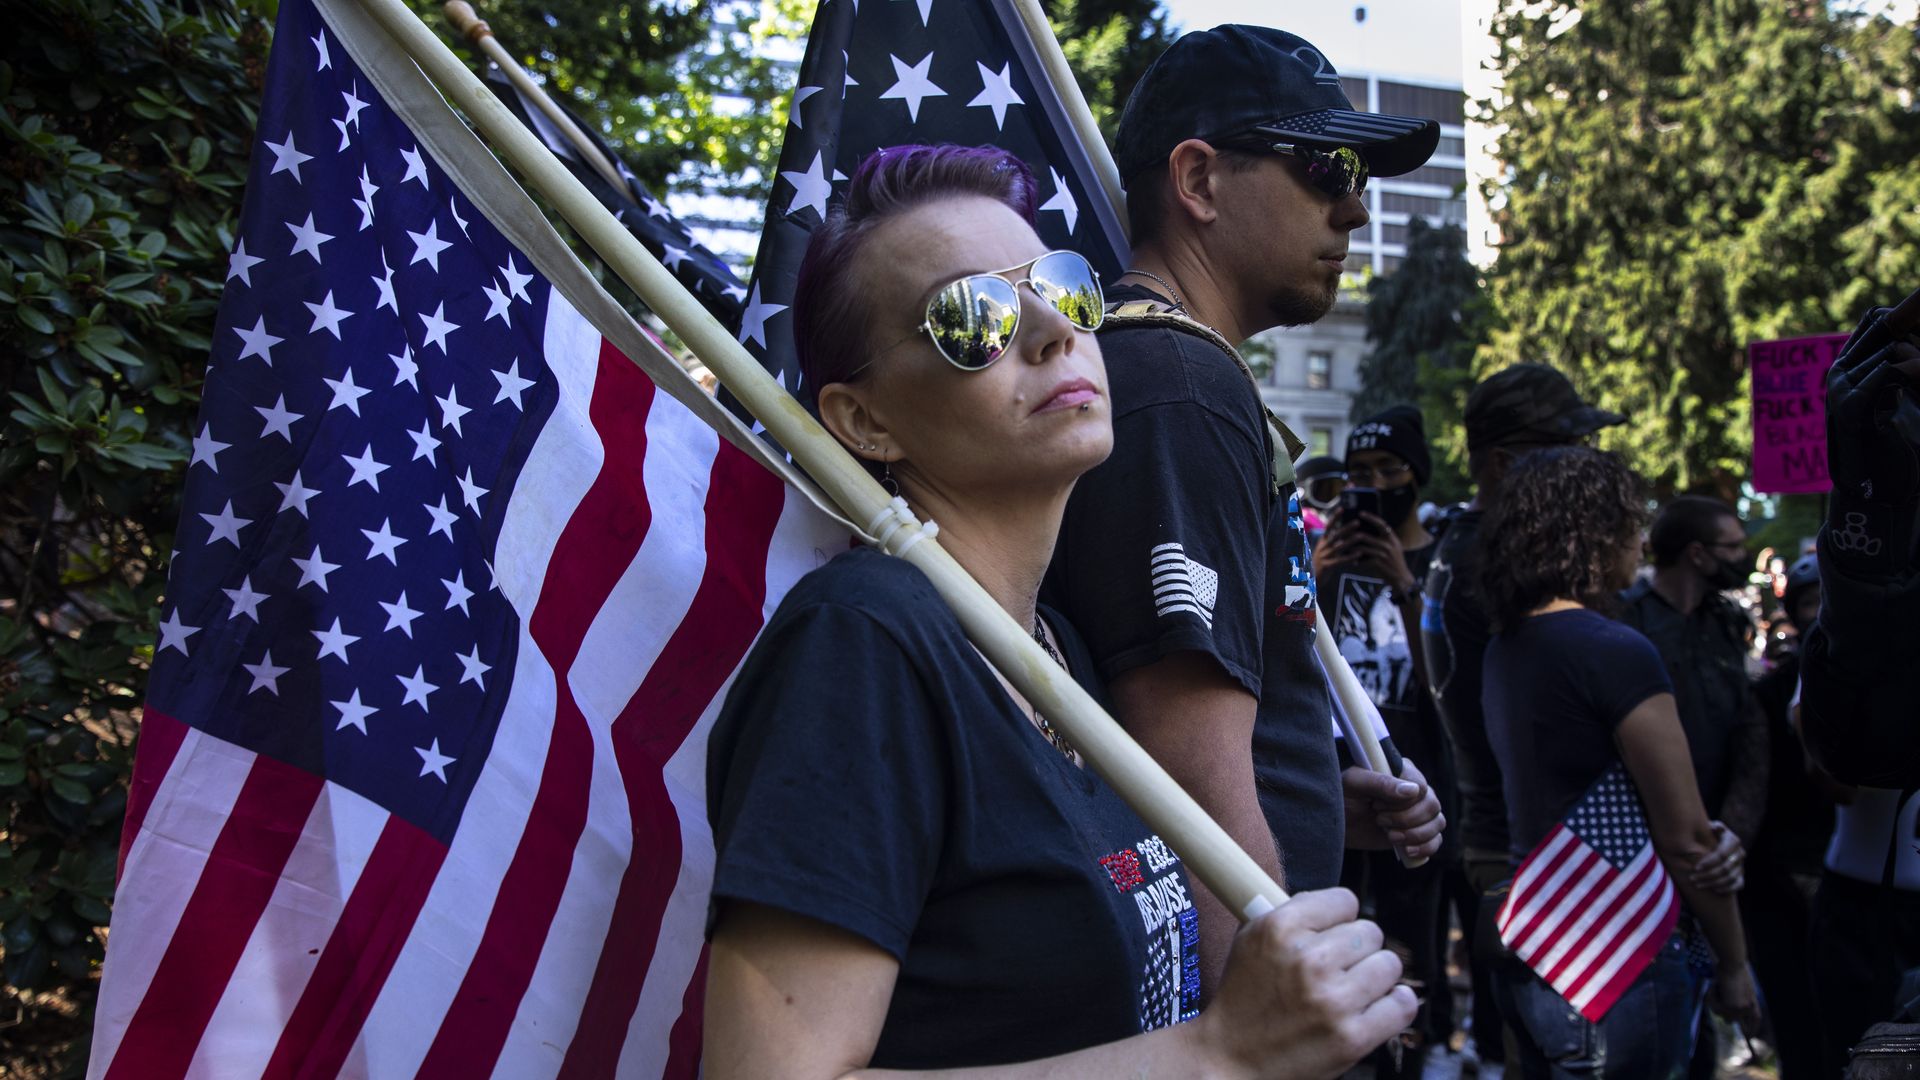 Protesters carry flags at a rally between the far-right Proud Boy and Black Lives Matter protesters in Portland, Oregon on August 22